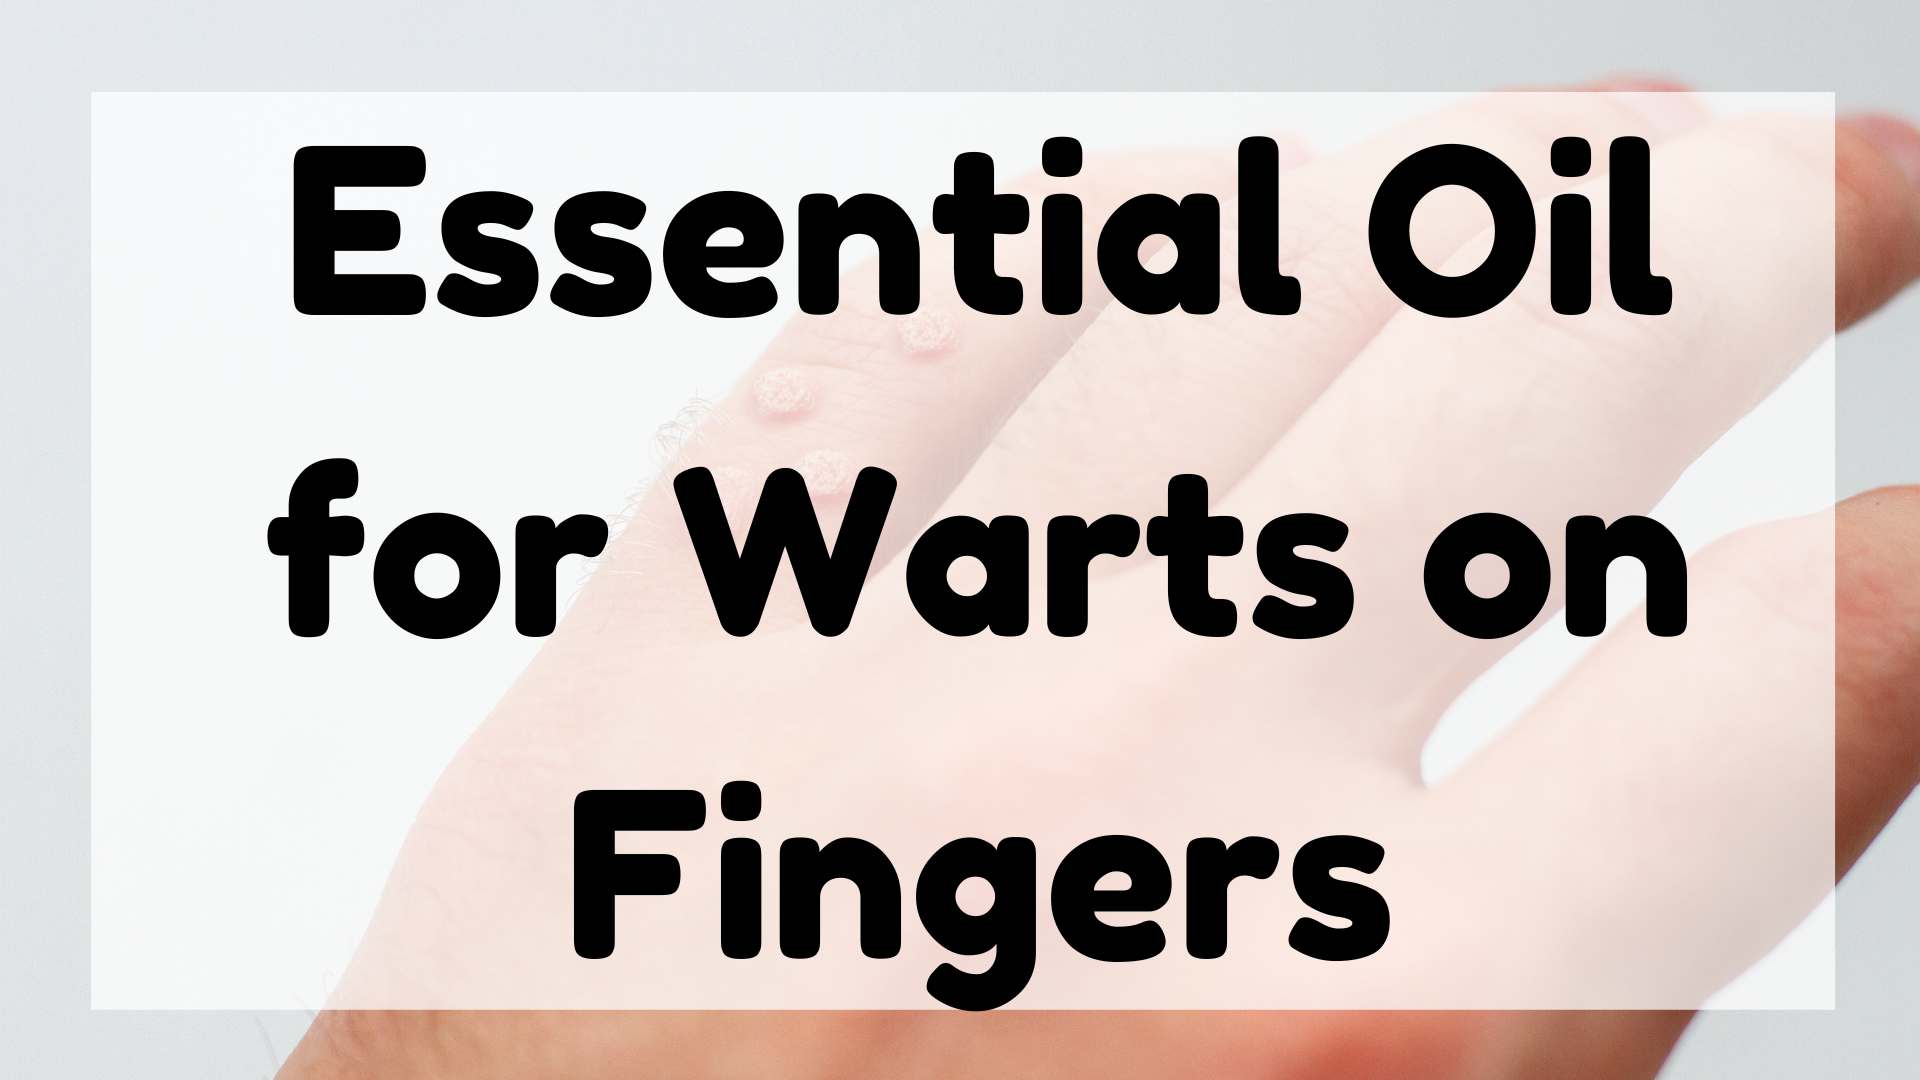 Essential Oil for Warts on Fingers featured image